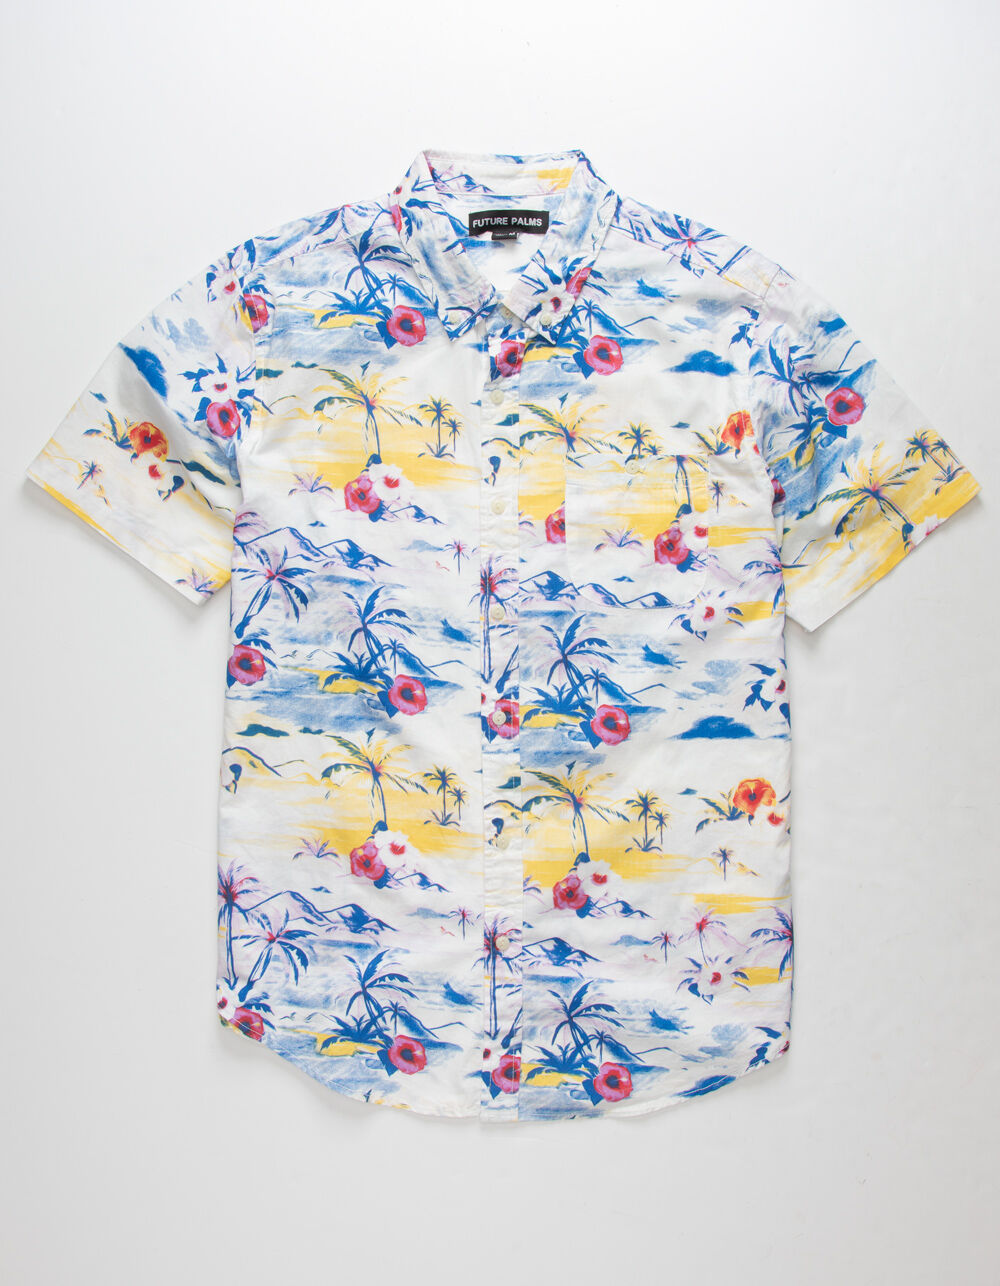 FUTURE PALMS Cabo Mens Button Up Shirt - WHITE COMBO | Tillys